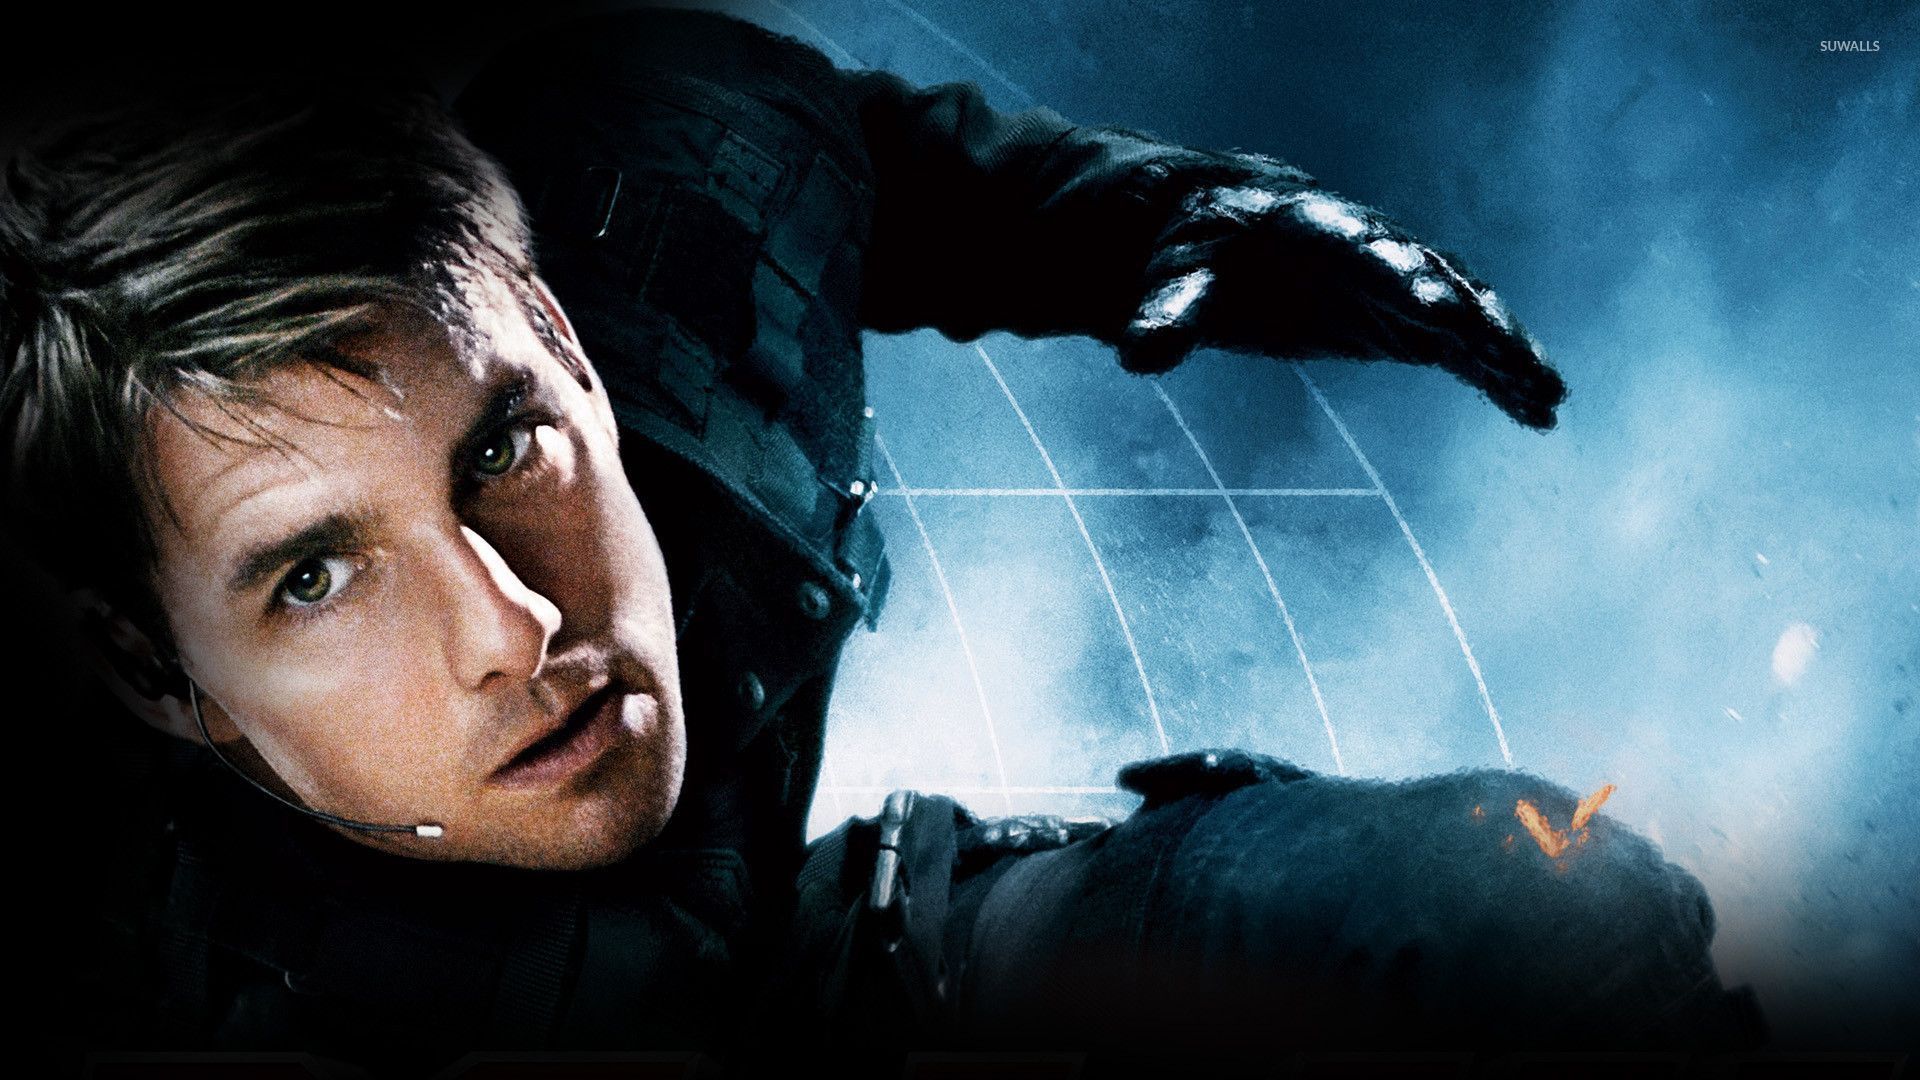 Mission Impossible Wallpaper. Impossible